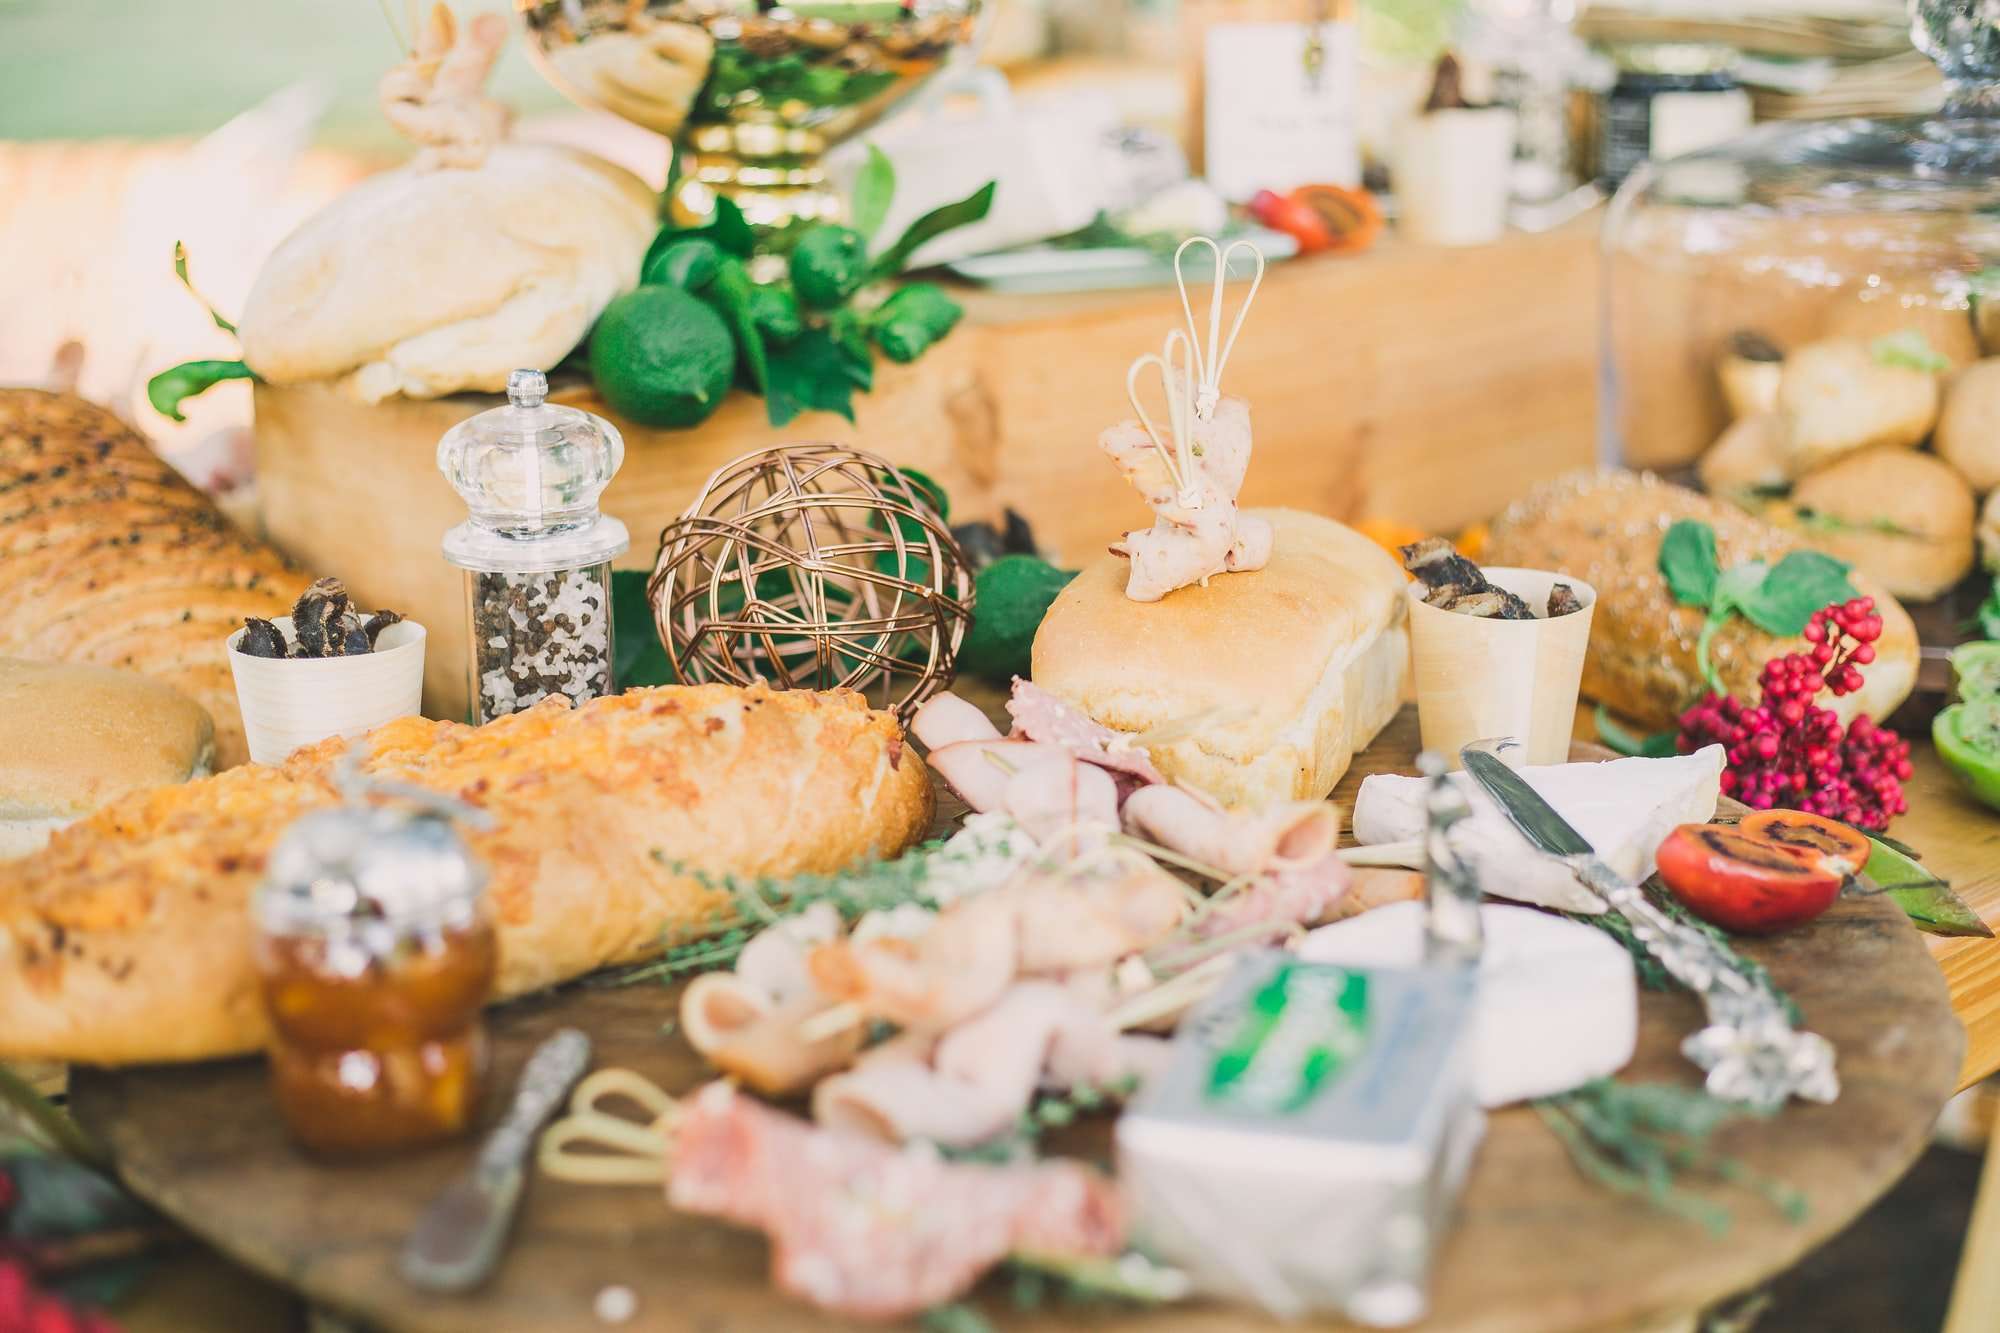 Assorted Deli Cuts And Bread On A Brown Wooden Tray 4d288ca74f722747cc5611027c9e629e 2000Creative Backyard Wedding Menu Ideas For Your Special Day